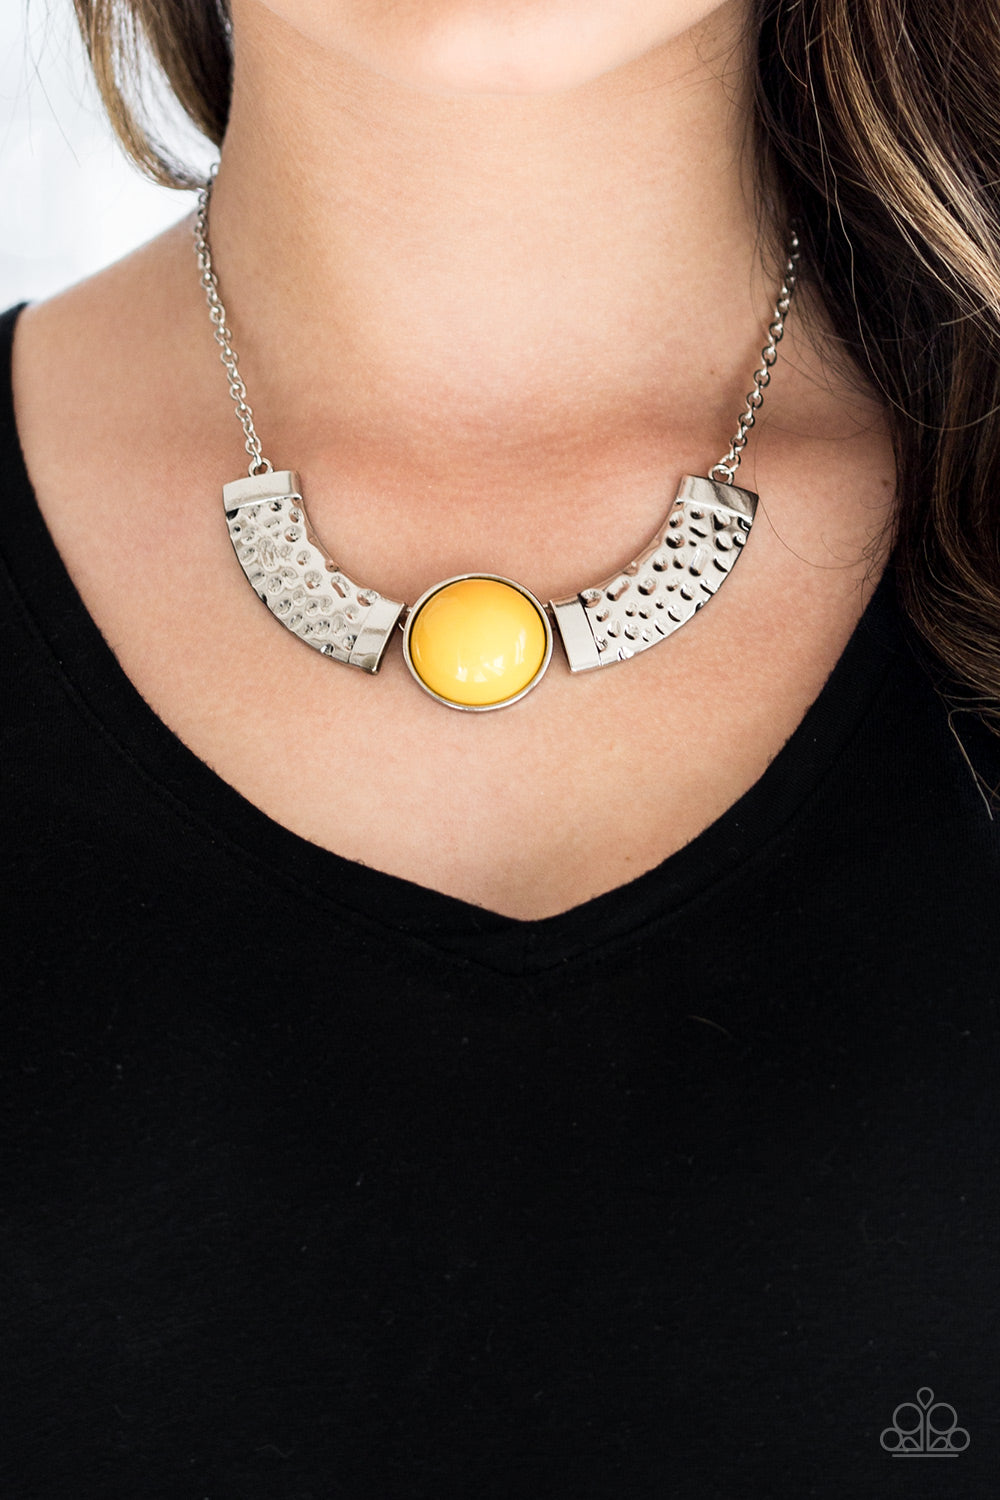 Paparazzi Accessories - Egyptian Spell - Yellow Necklace